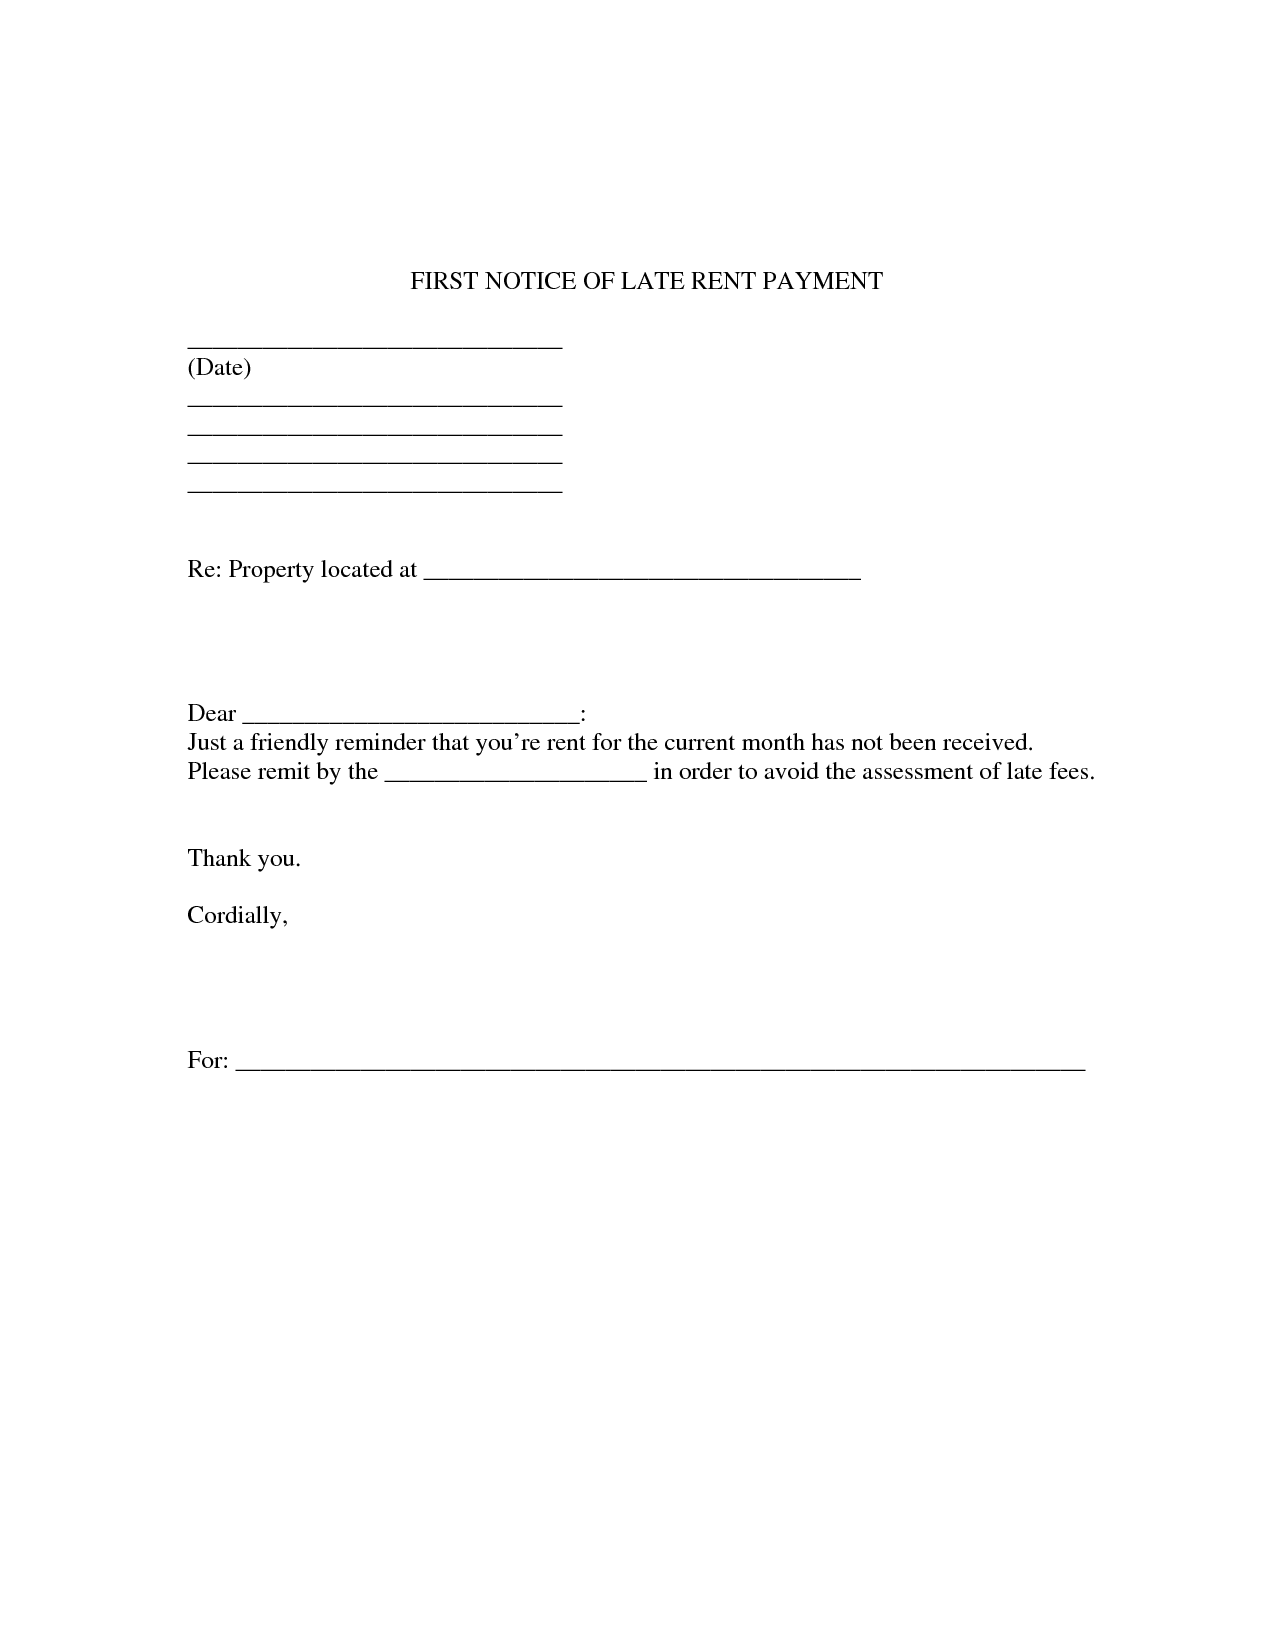 Late Rent Notice Free Printable Documents